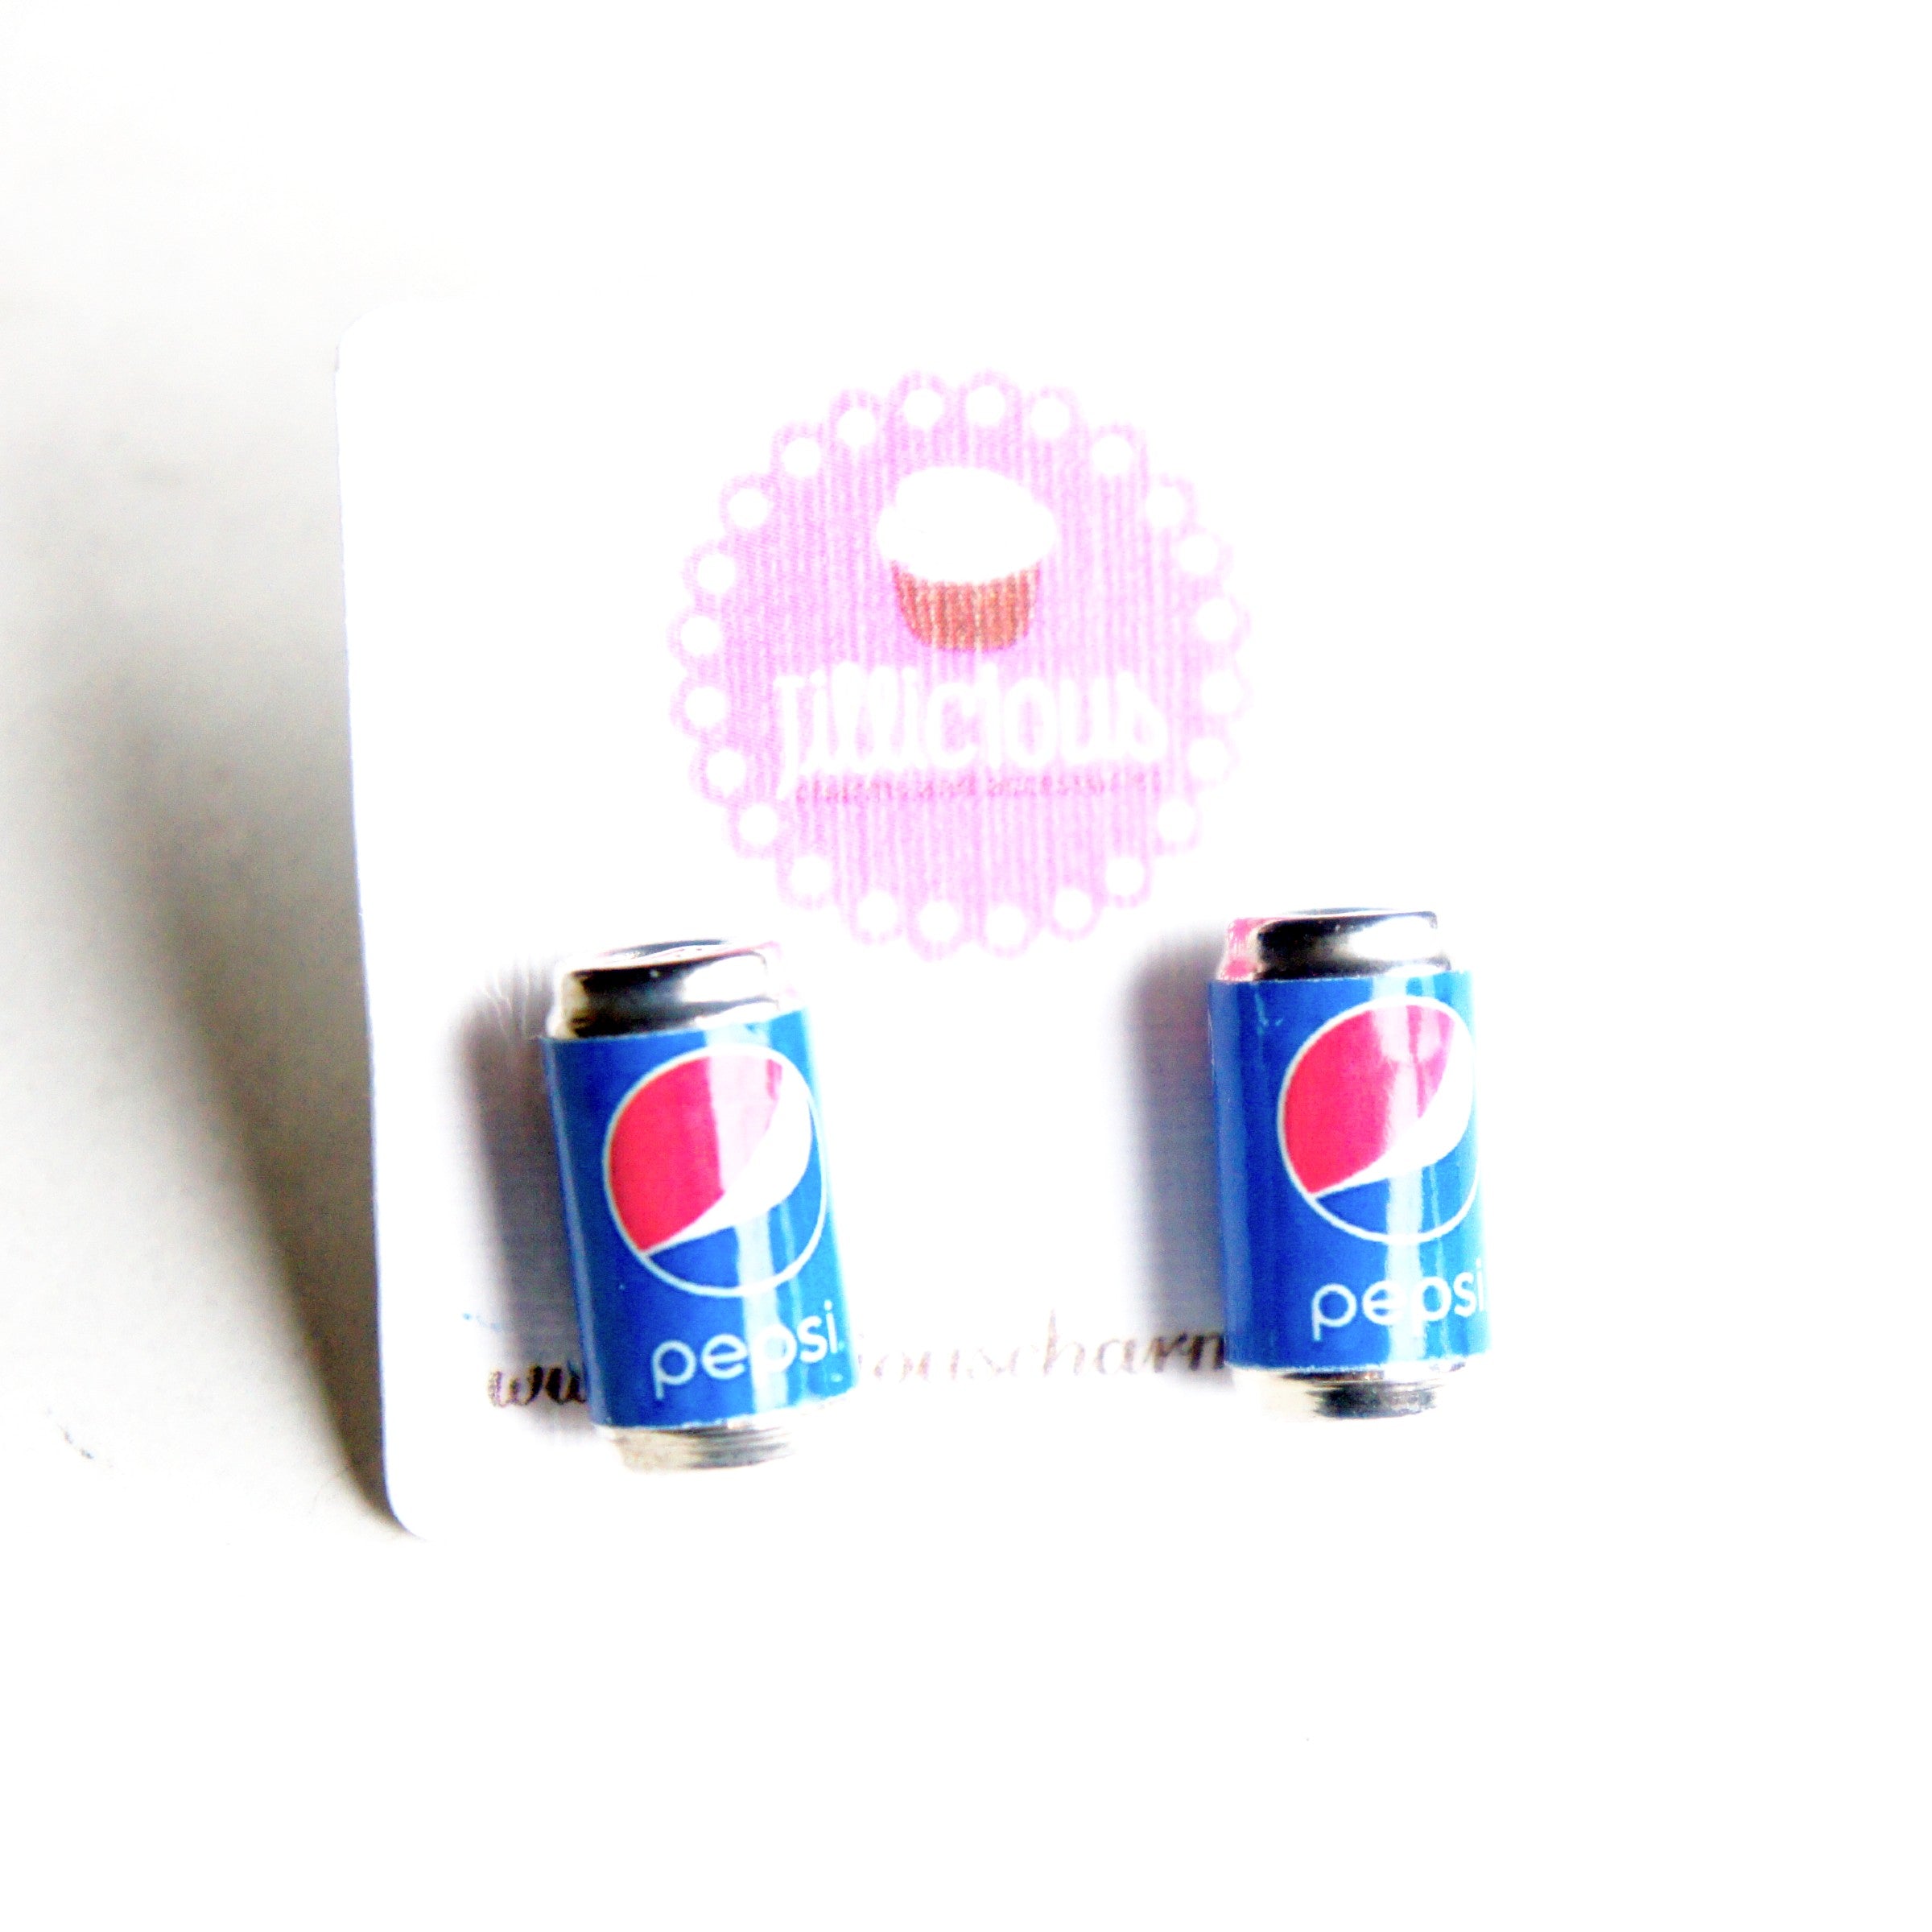 Pepsi Soda Can Earrings - Jillicious charms and accessories